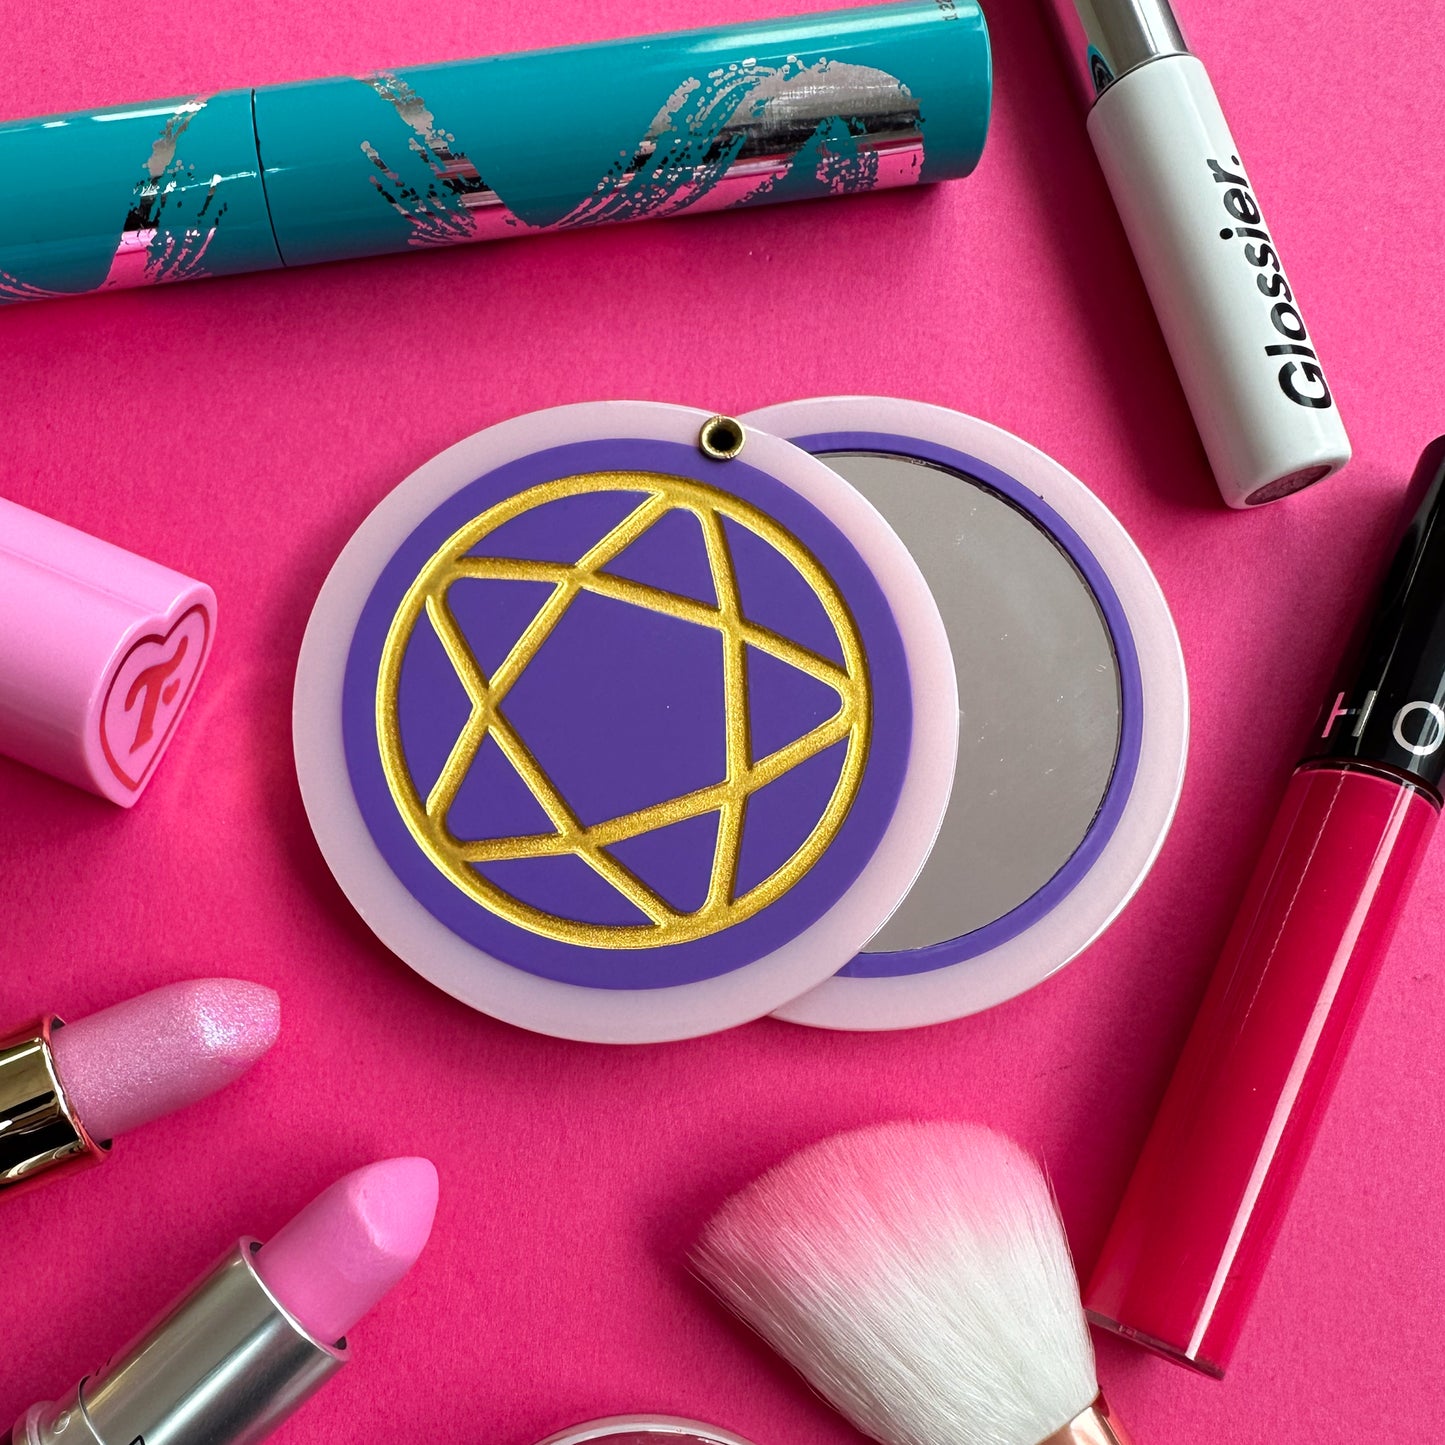 A circular hanged compact mirror that is a purple circle with a pastel pink border with a gold shiny pentacle embossed on the cover.  There are various lipsticks and mascara tubes around the mirror. 